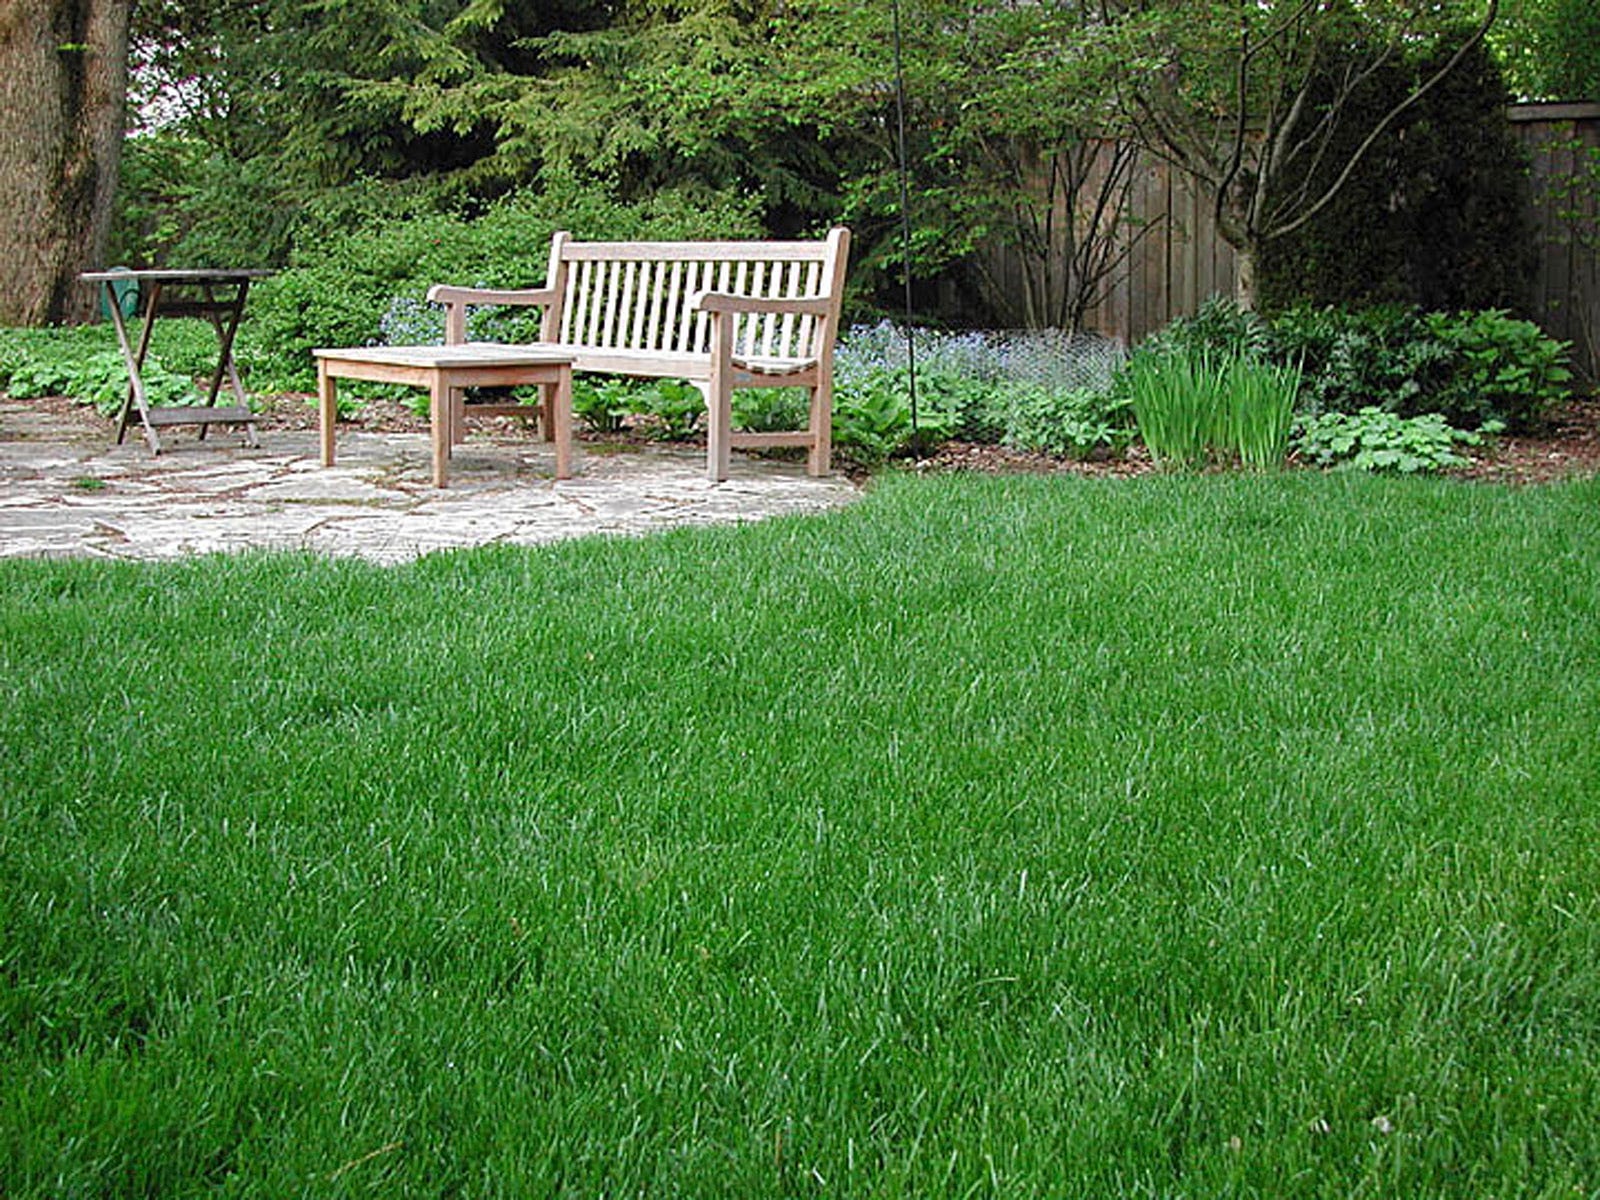 Gardening: Late fall fertilization and weed control are key to spring lawn growth